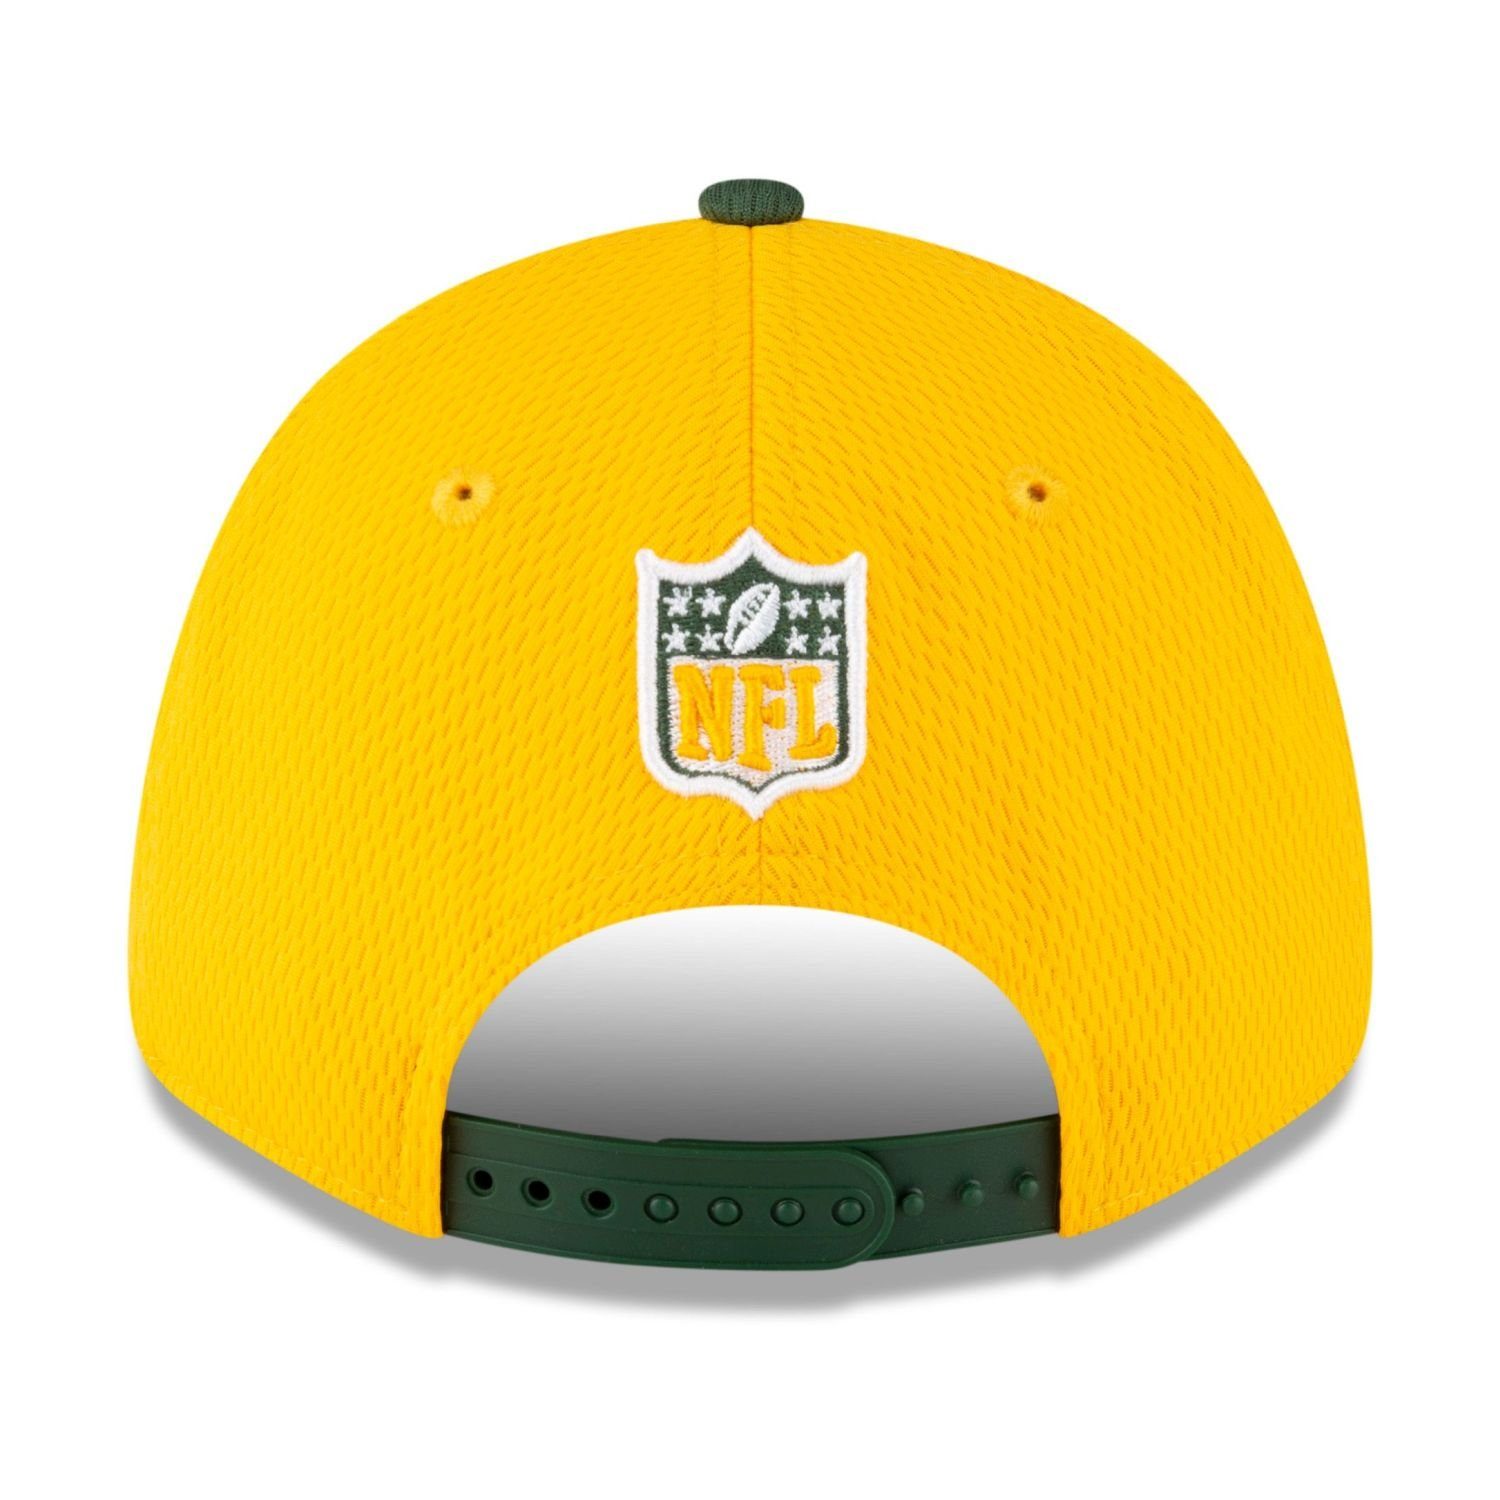 New Era Flex Cap 9Forty Stretch Green 2023 Bay Packers SIDELINE